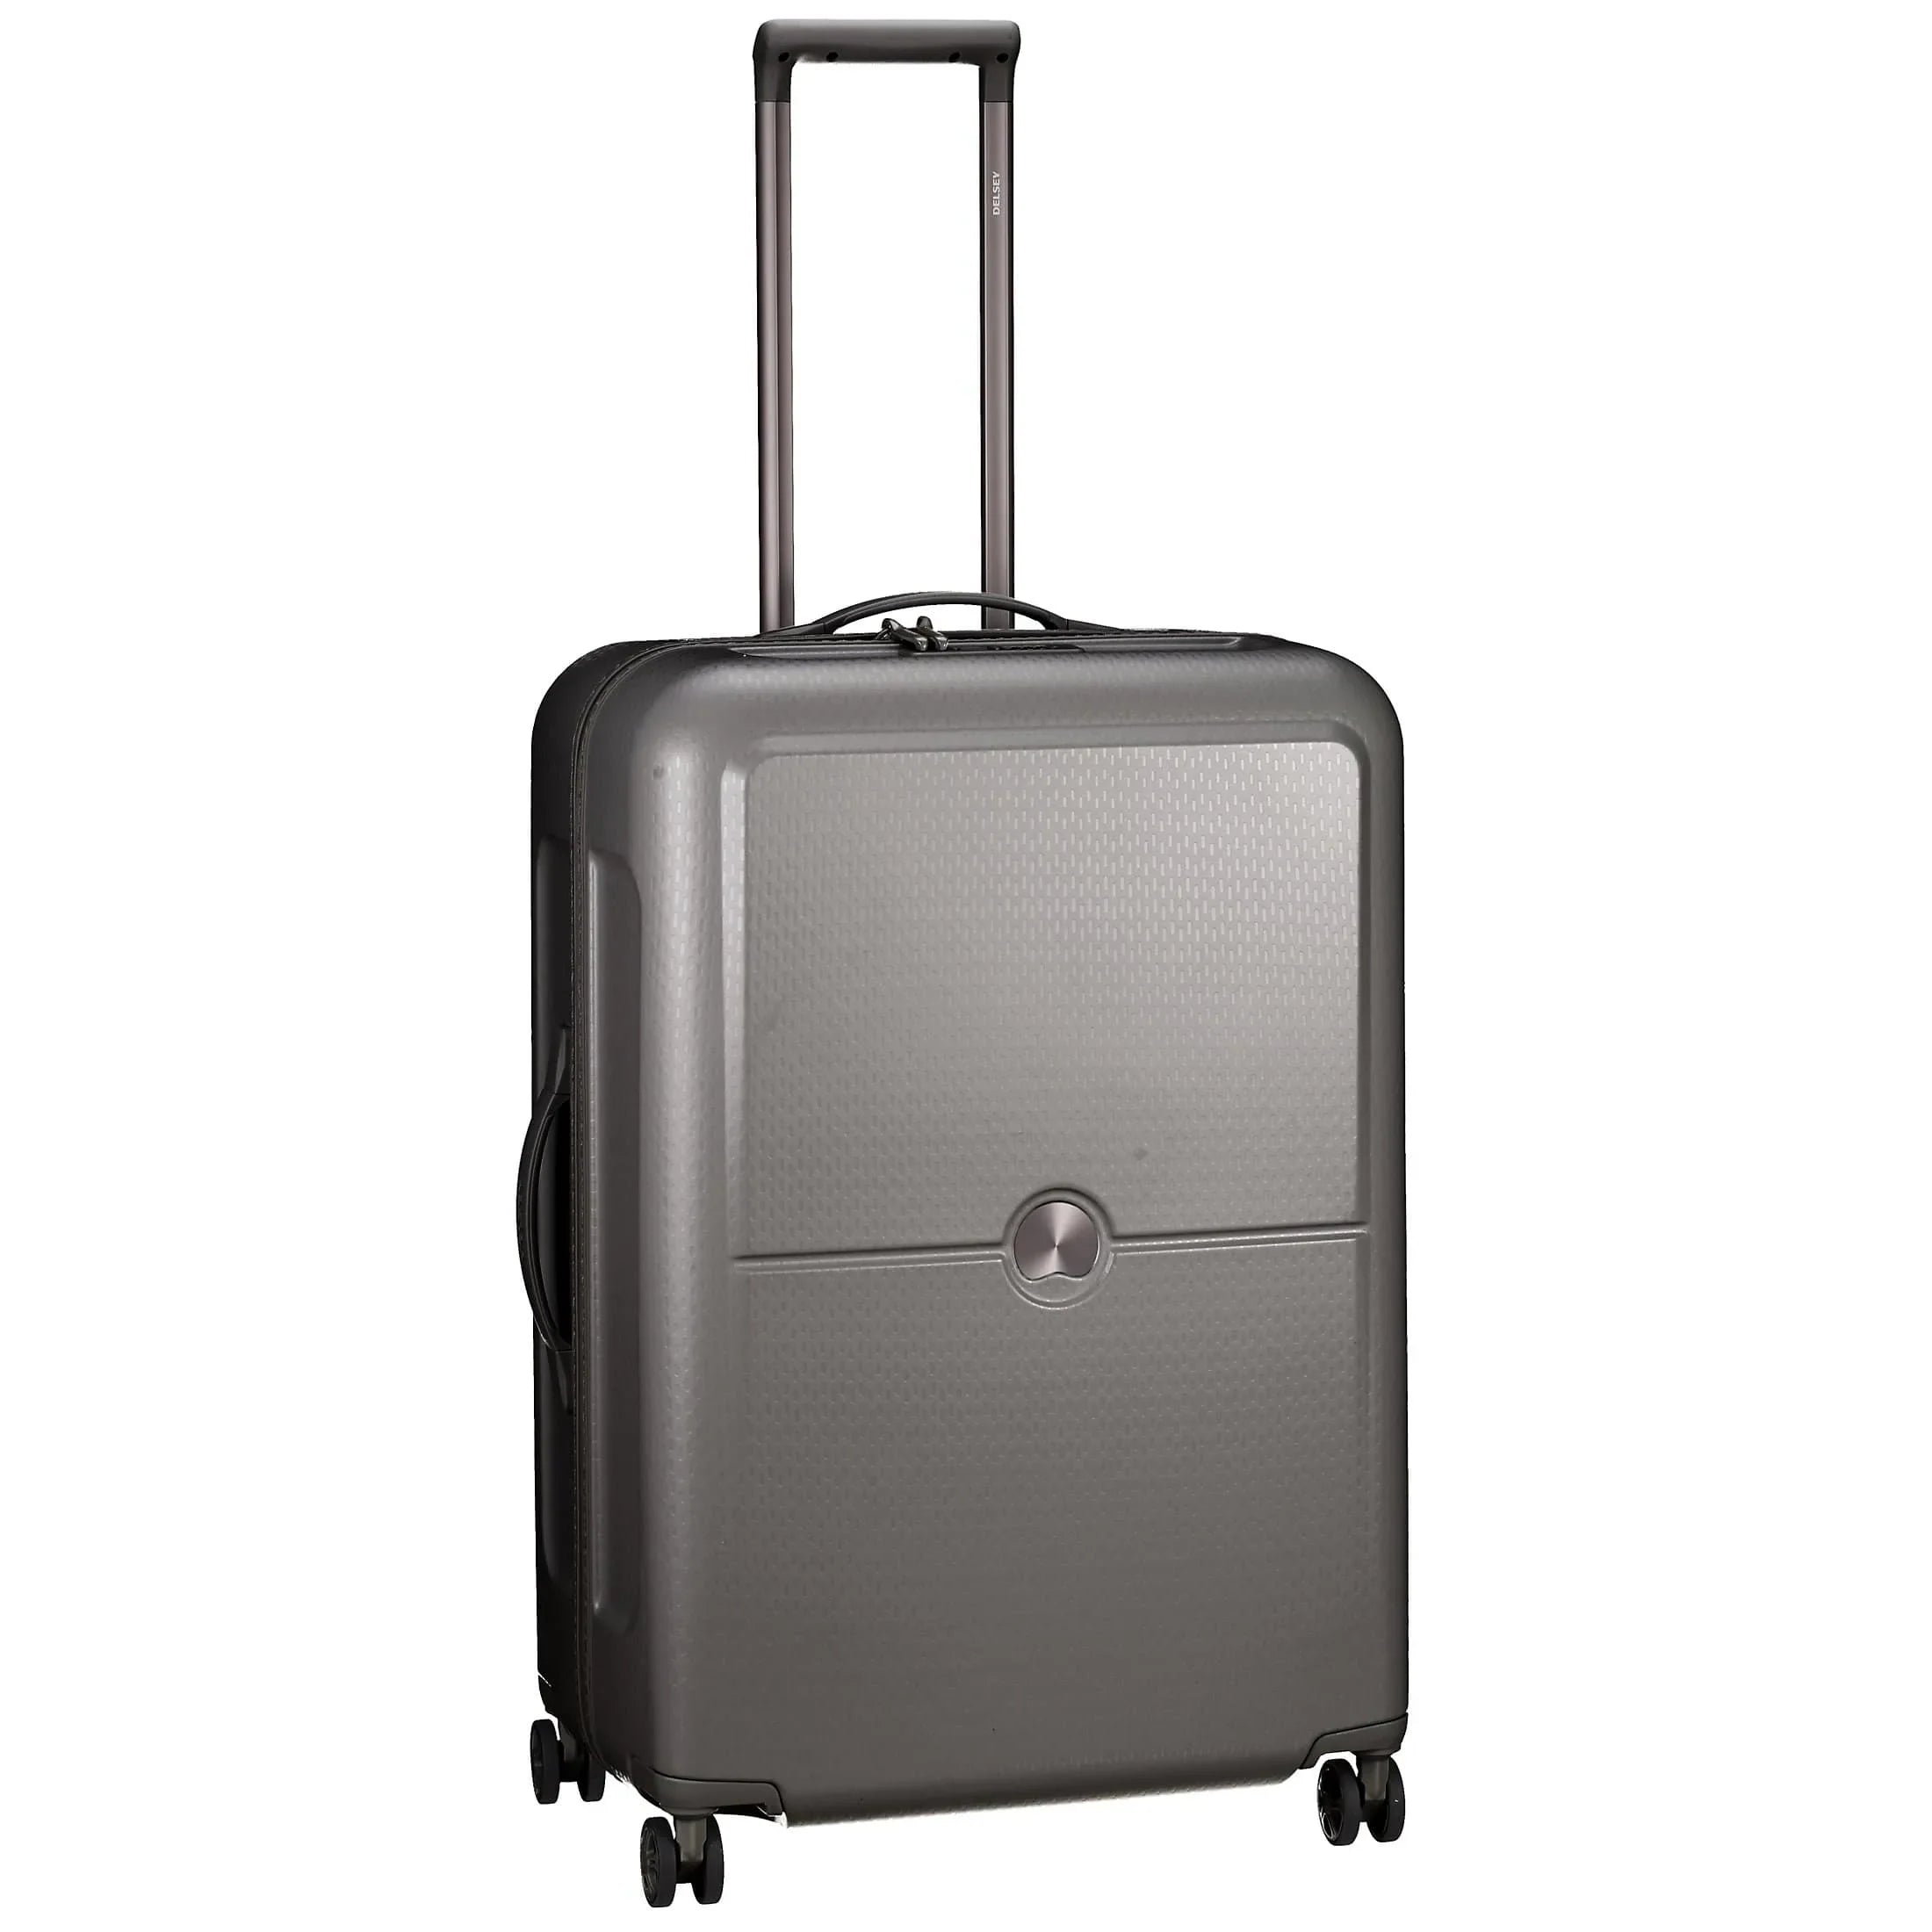 Delsey Turenne trolley 4 roues 70 cm - argent